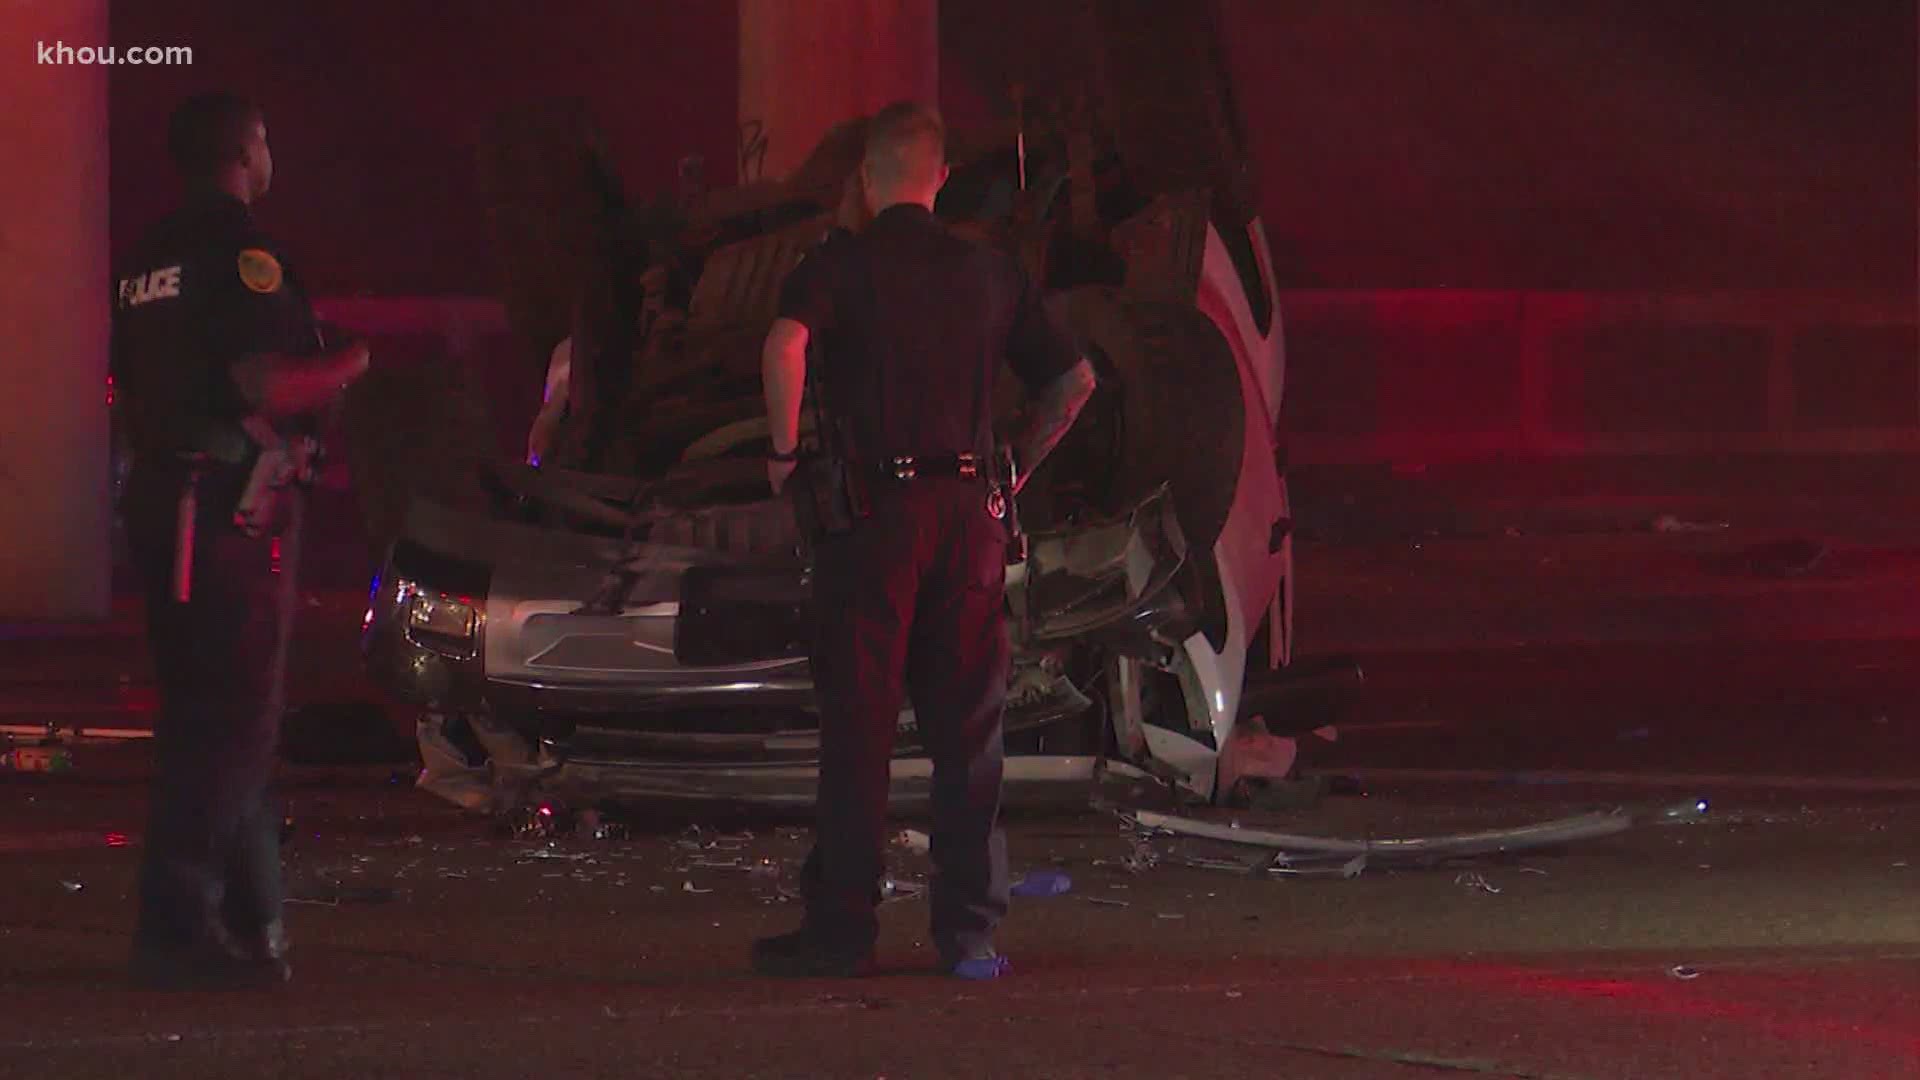 Three people, including an infant, were transported to a hospital after their truck flew off a North Freeway and landed upside-down Thursday night.